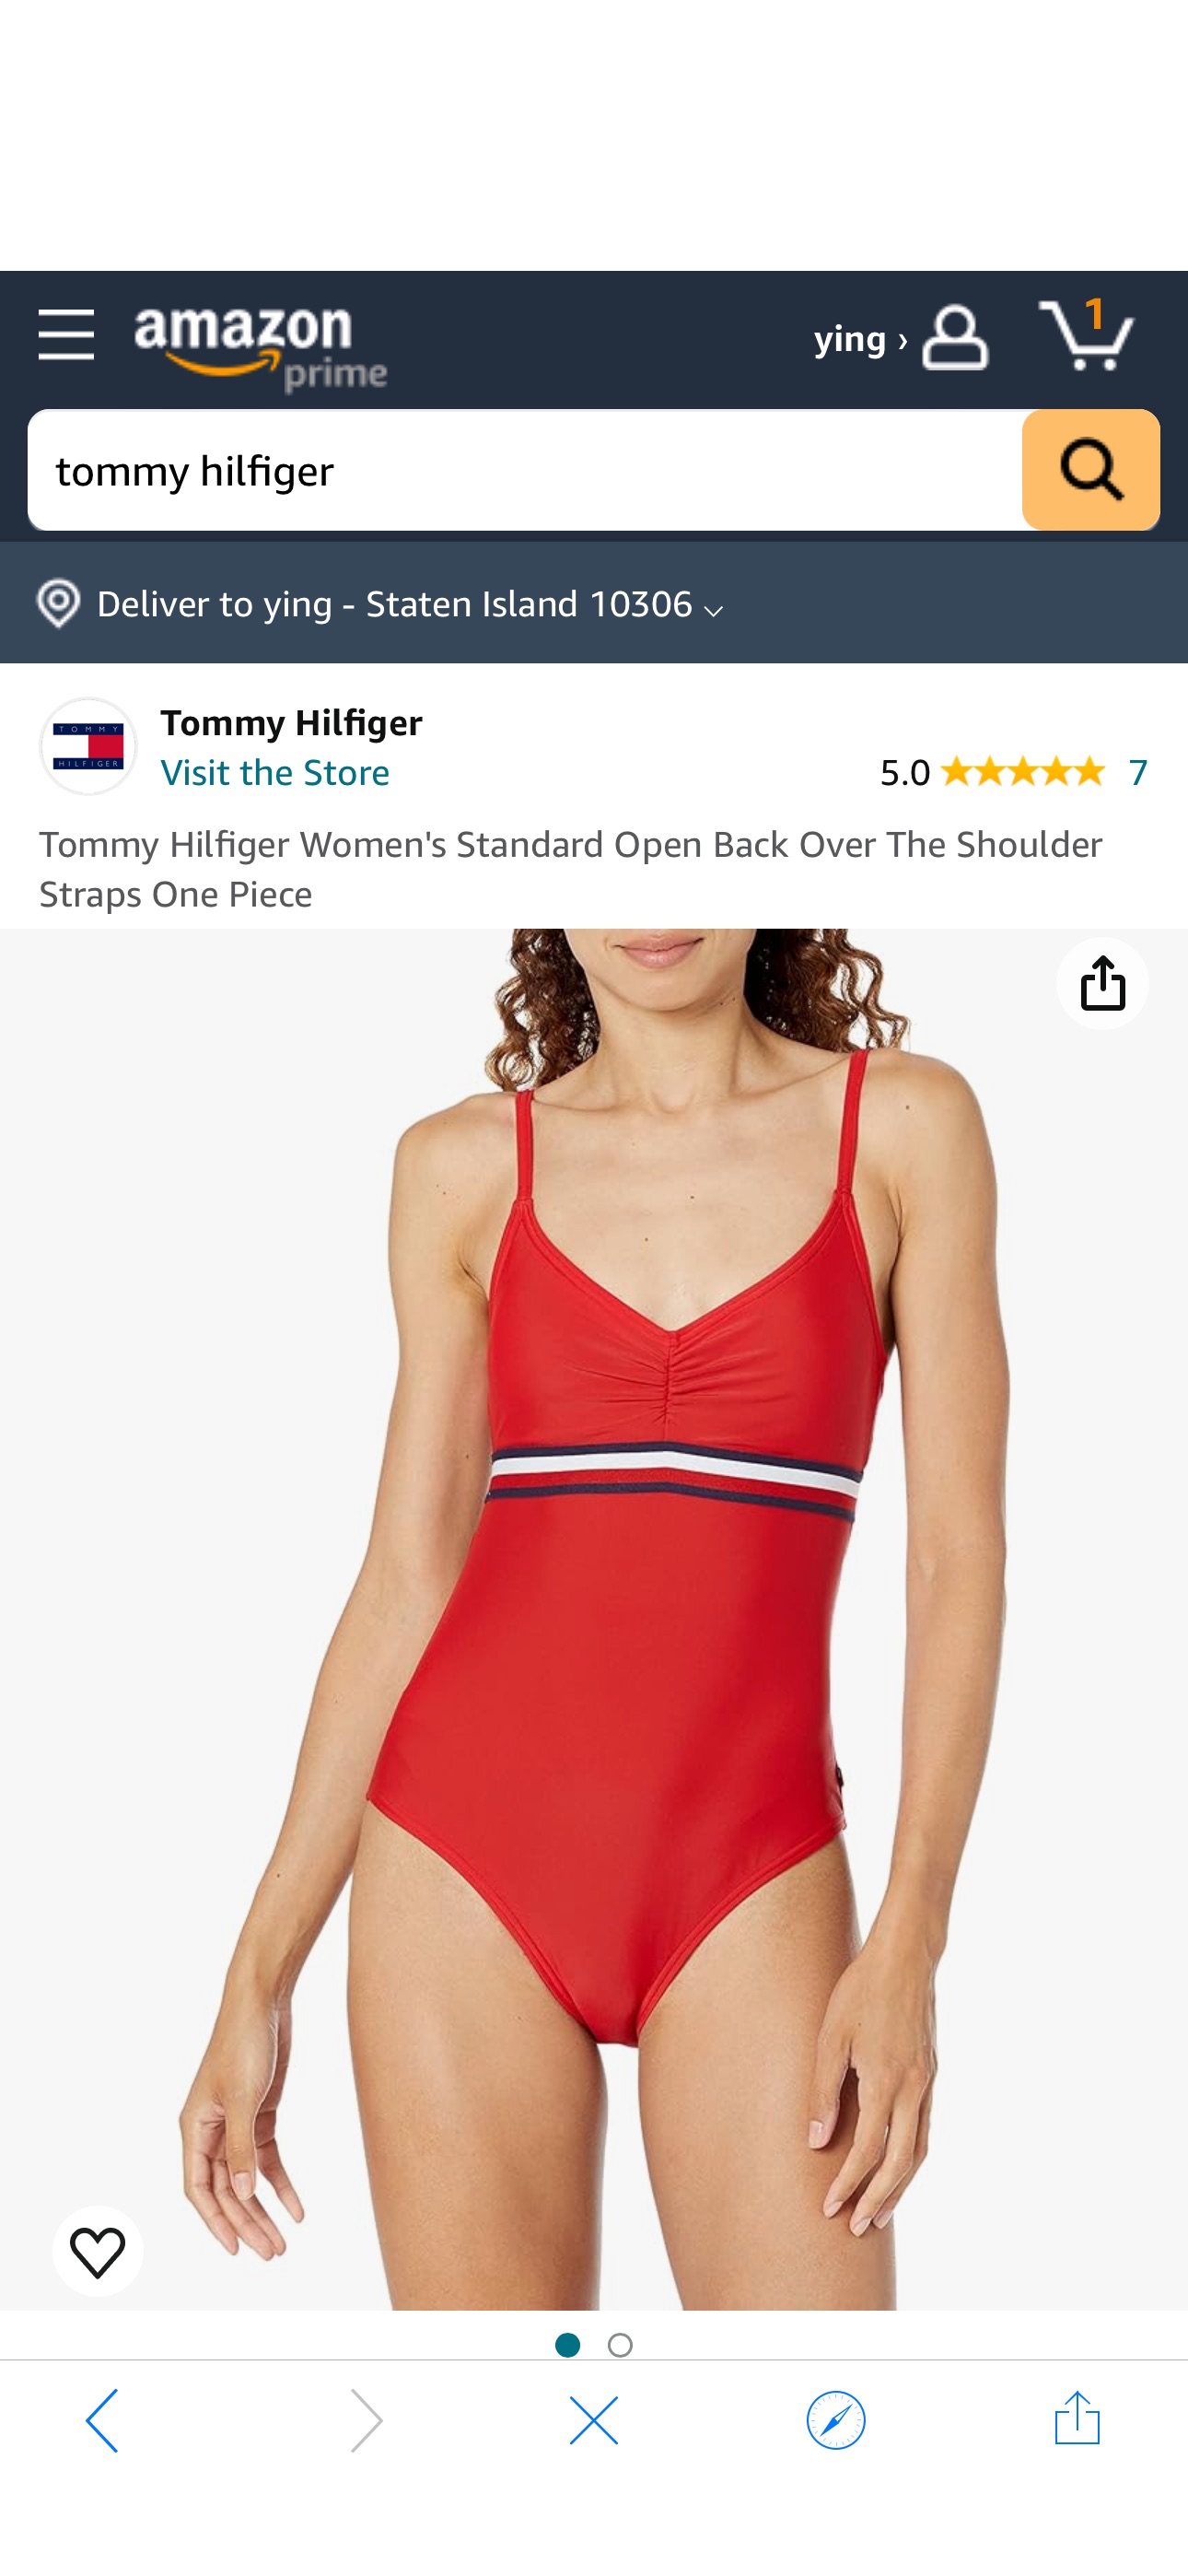 Tommy Hilfiger Women's Standard Open Back Over The Shoulder Straps One Piece, Scarlet at Amazon Women’s Clothing store